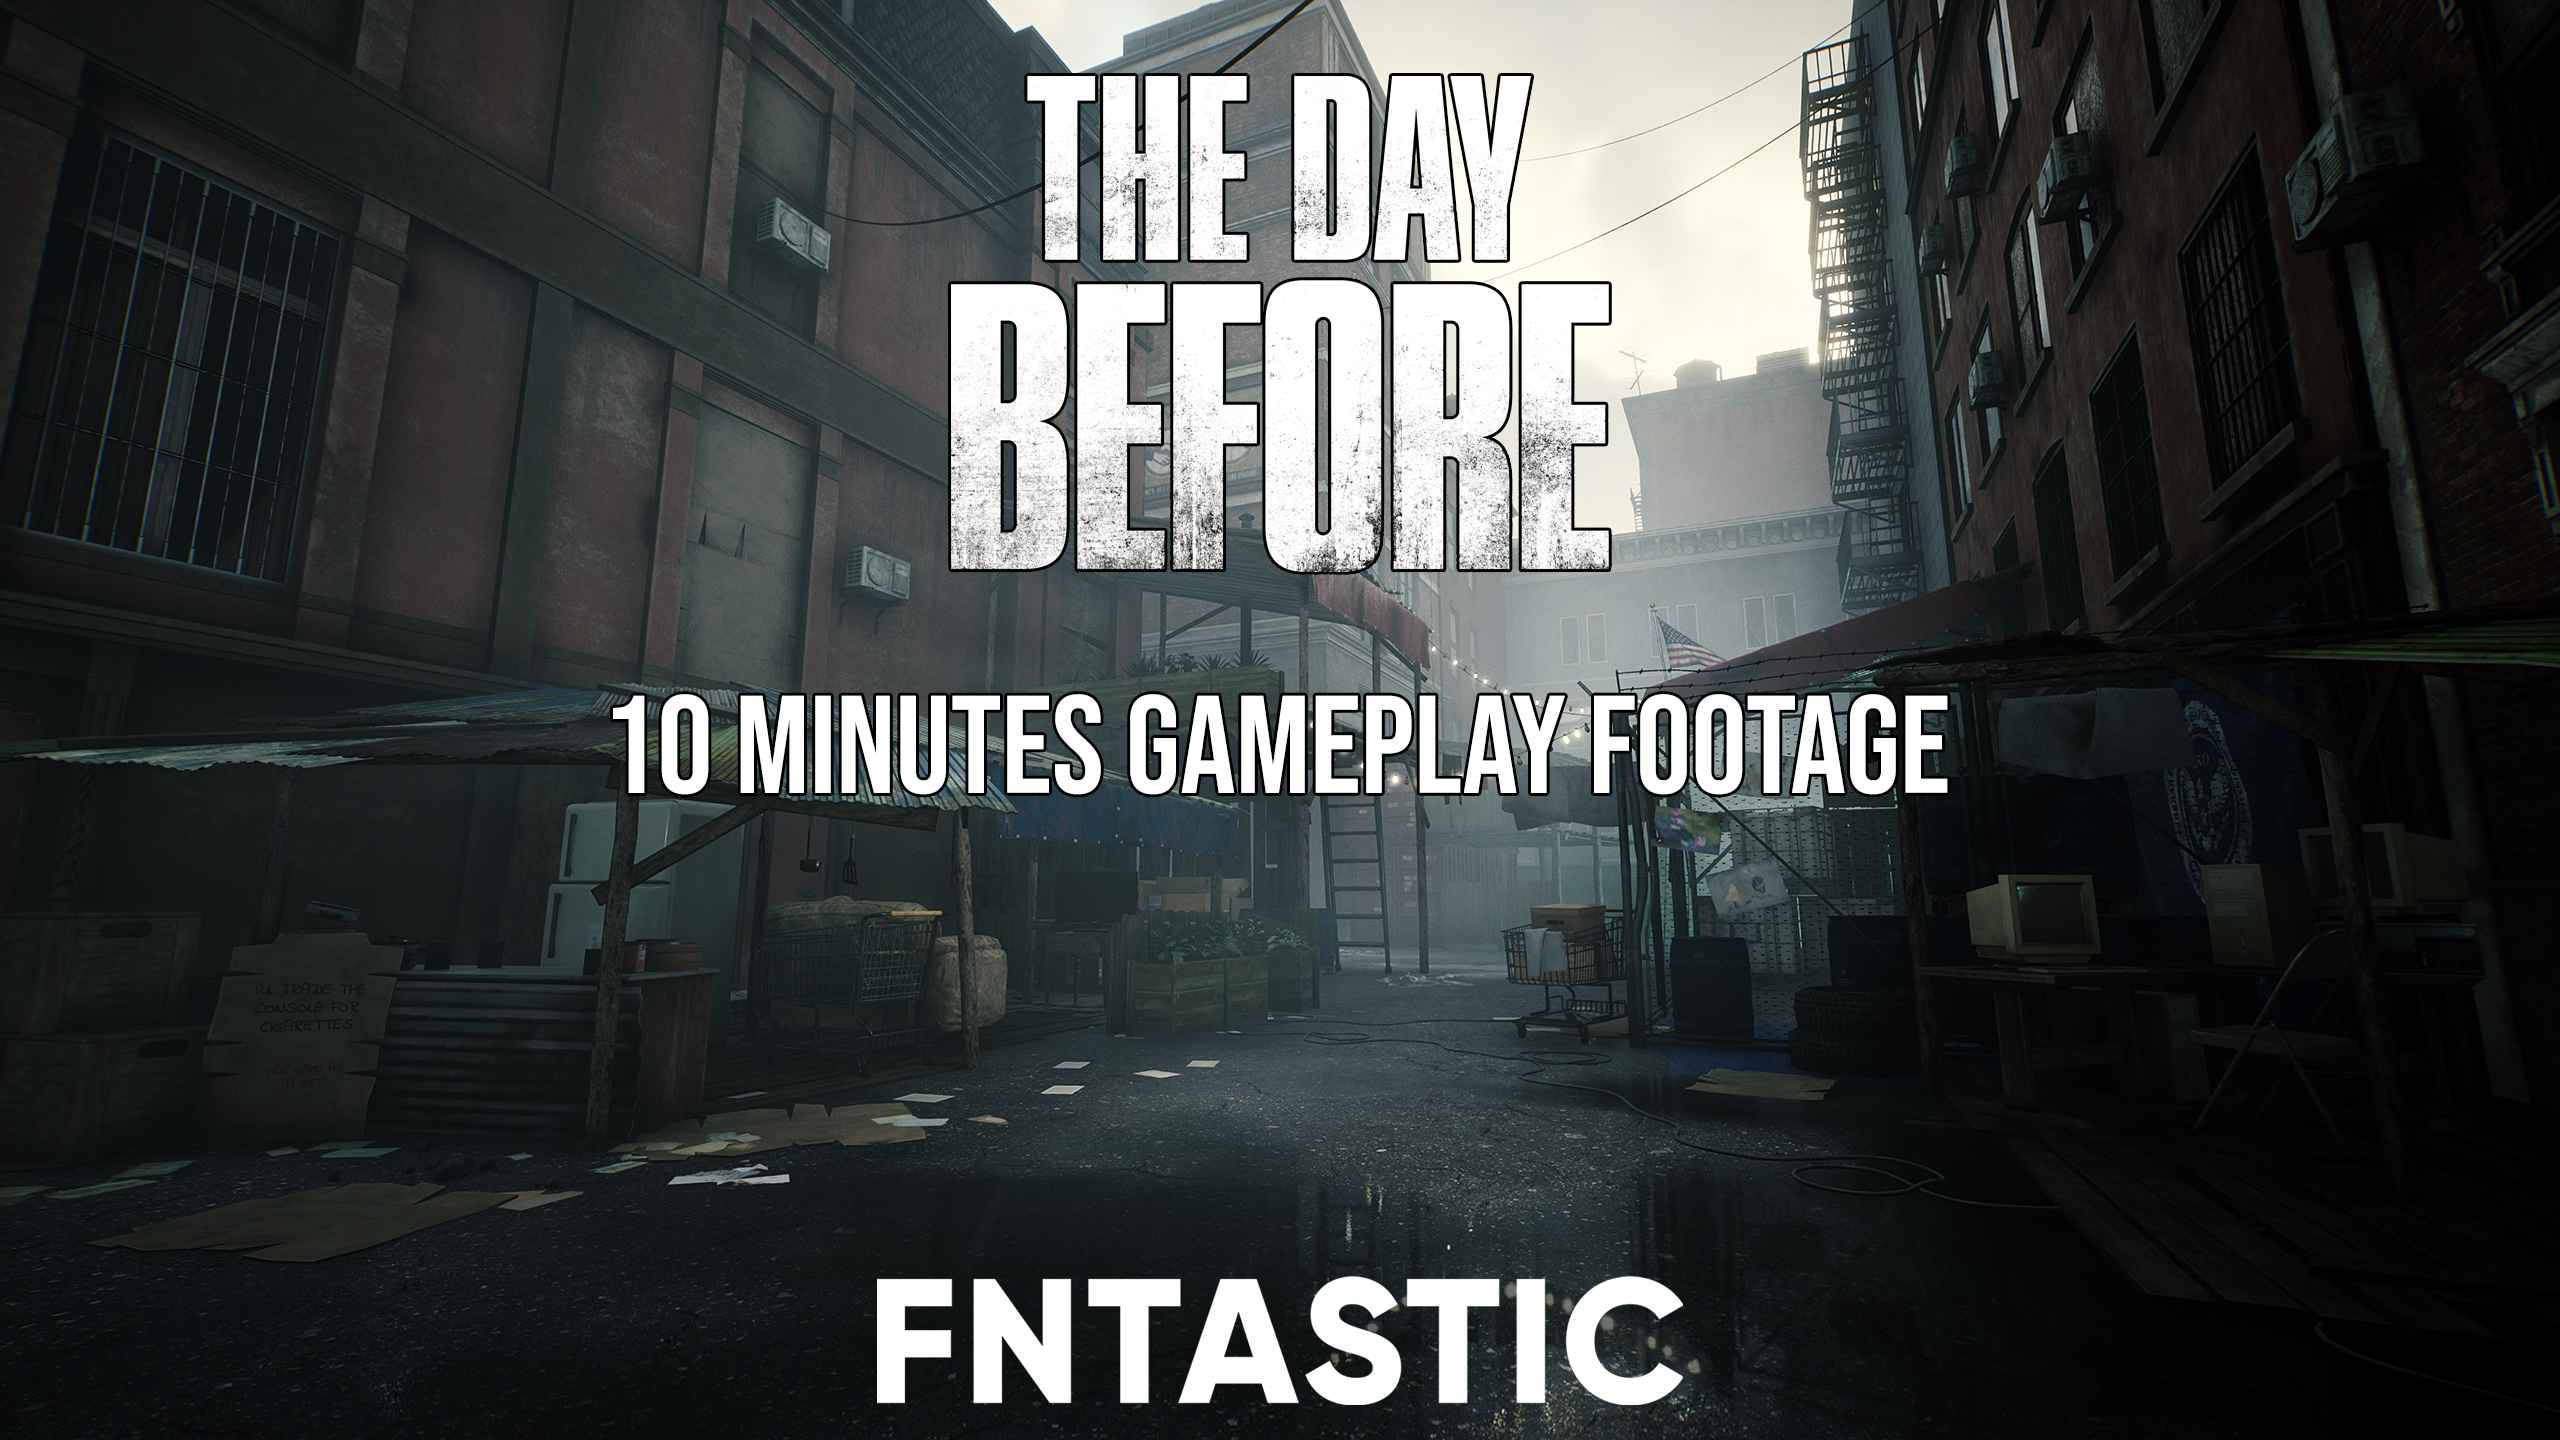 The Day Before has promised 10-minute gameplay reveal tomorrow